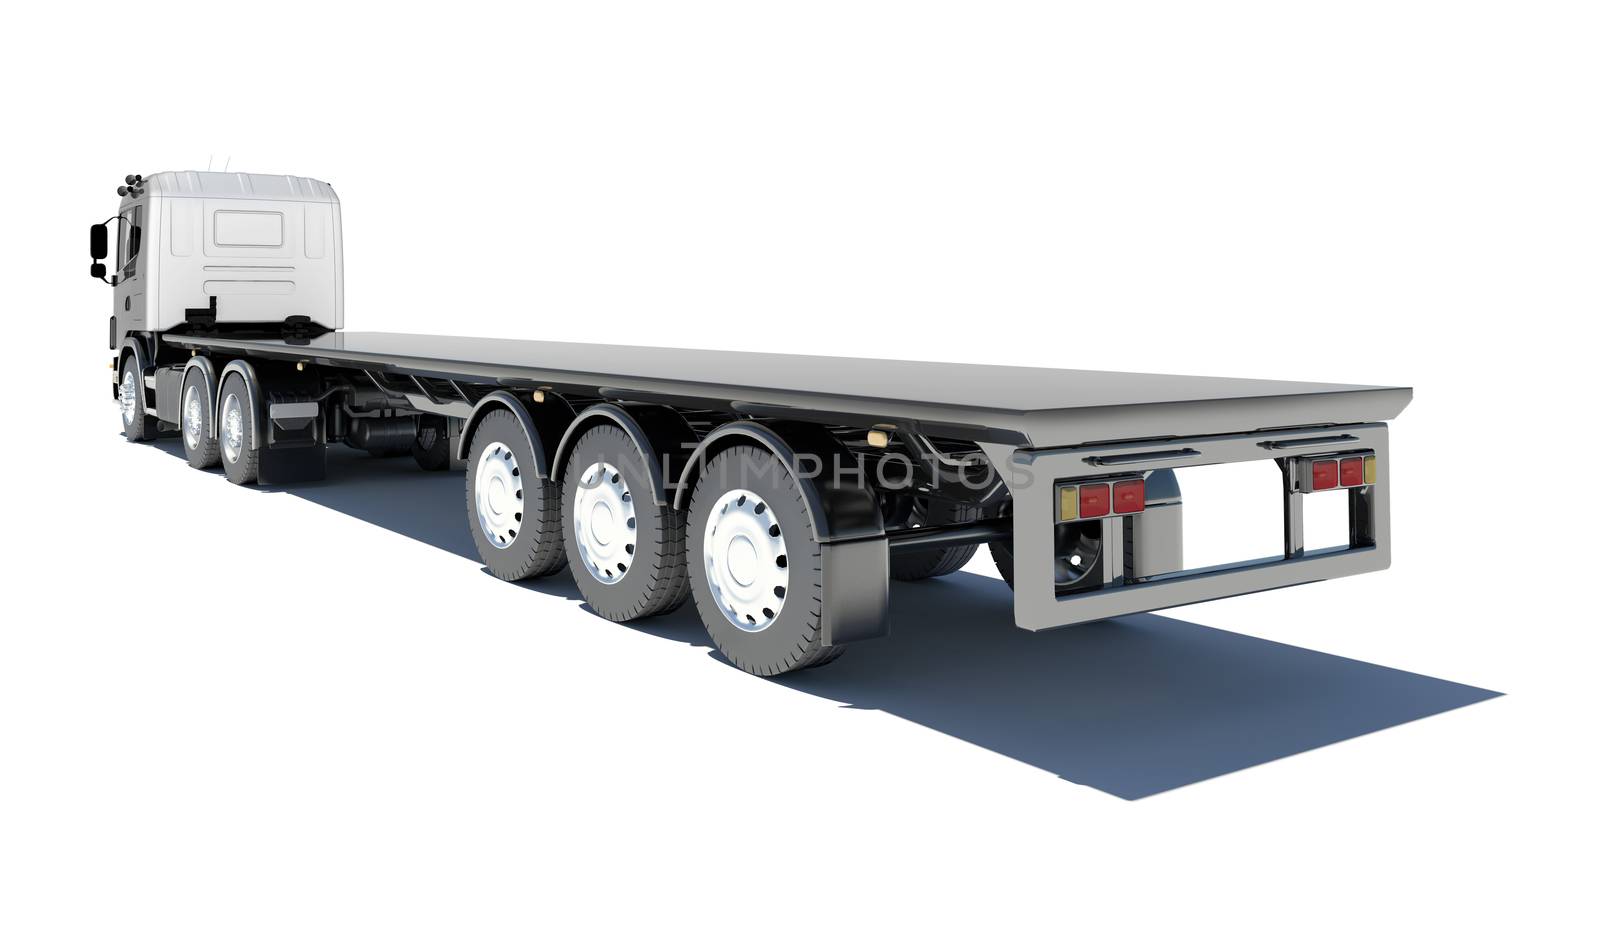 Truck with semitrailer platform. Rear view. Isolated render on a white background